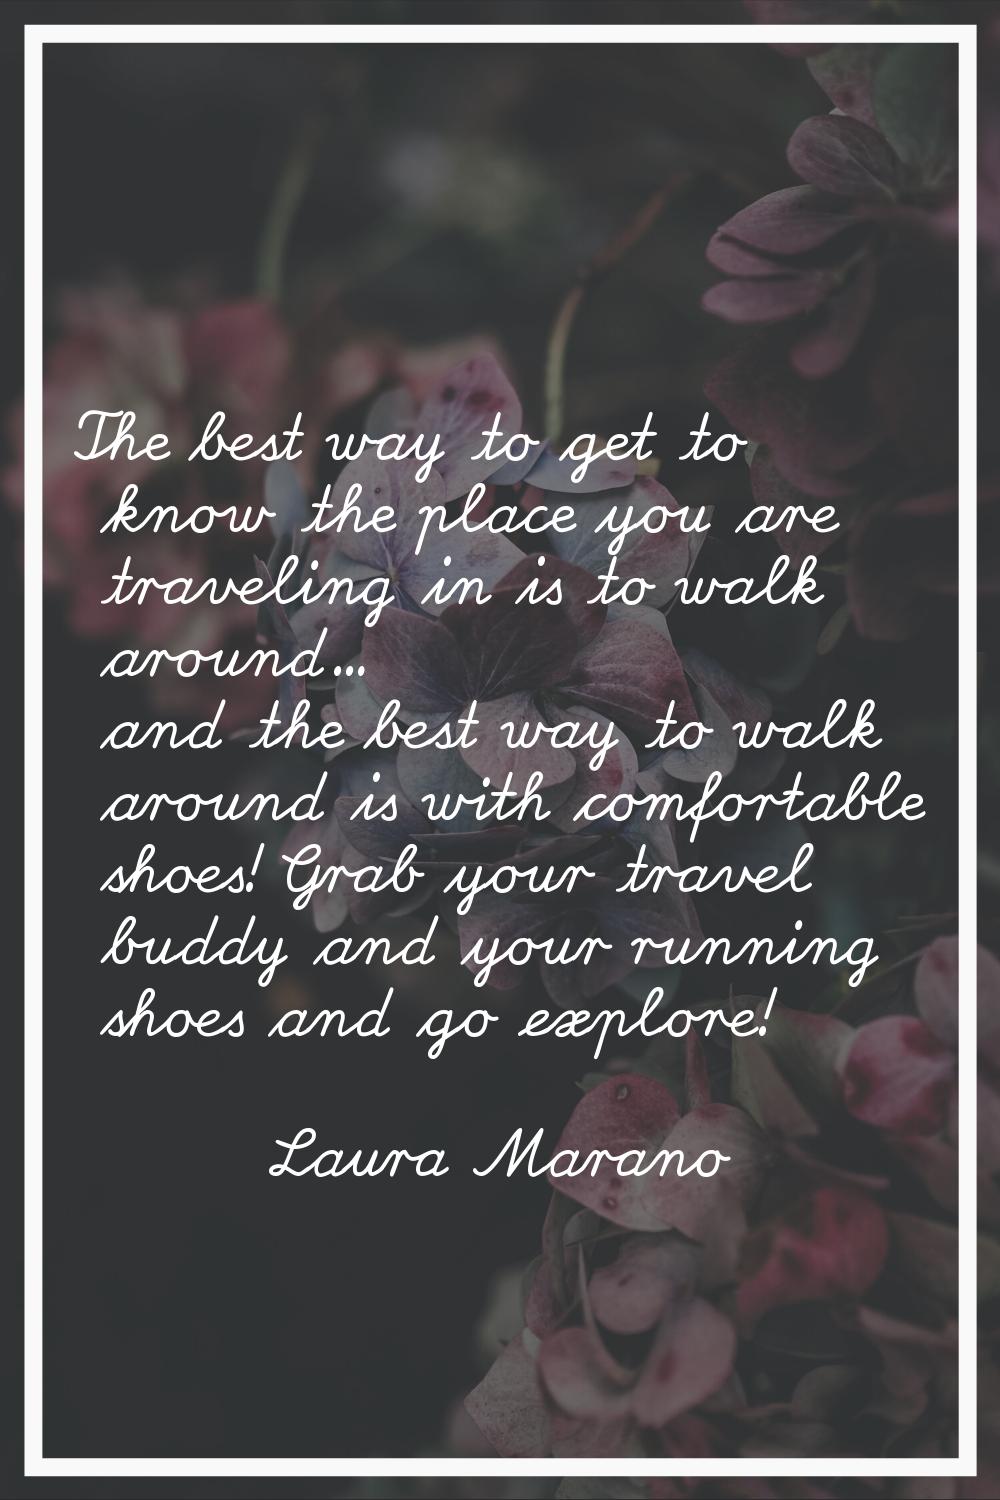 The best way to get to know the place you are traveling in is to walk around... and the best way to